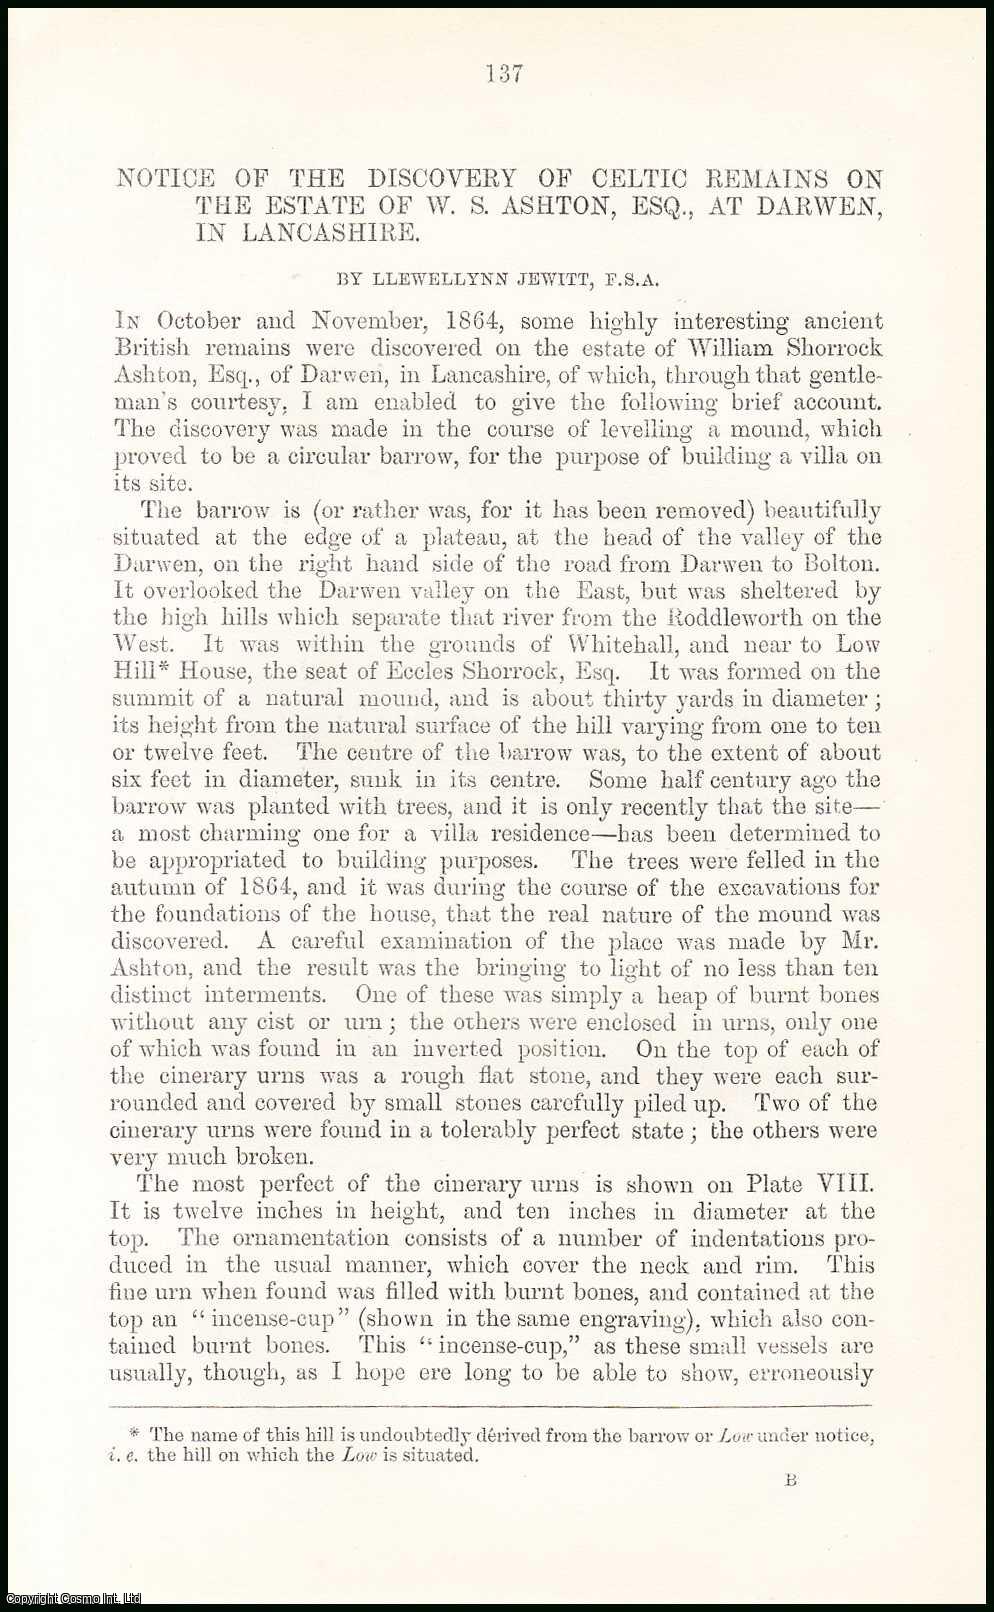 Llewellynn Jewitt, F.S.A. - The Discovery of Celtic Remains on the Estate of W.S. Ashton, Esq., at Darwen, in Lancashire. An original article from the Reliquary, Quarterly Journal & Review, 1865.